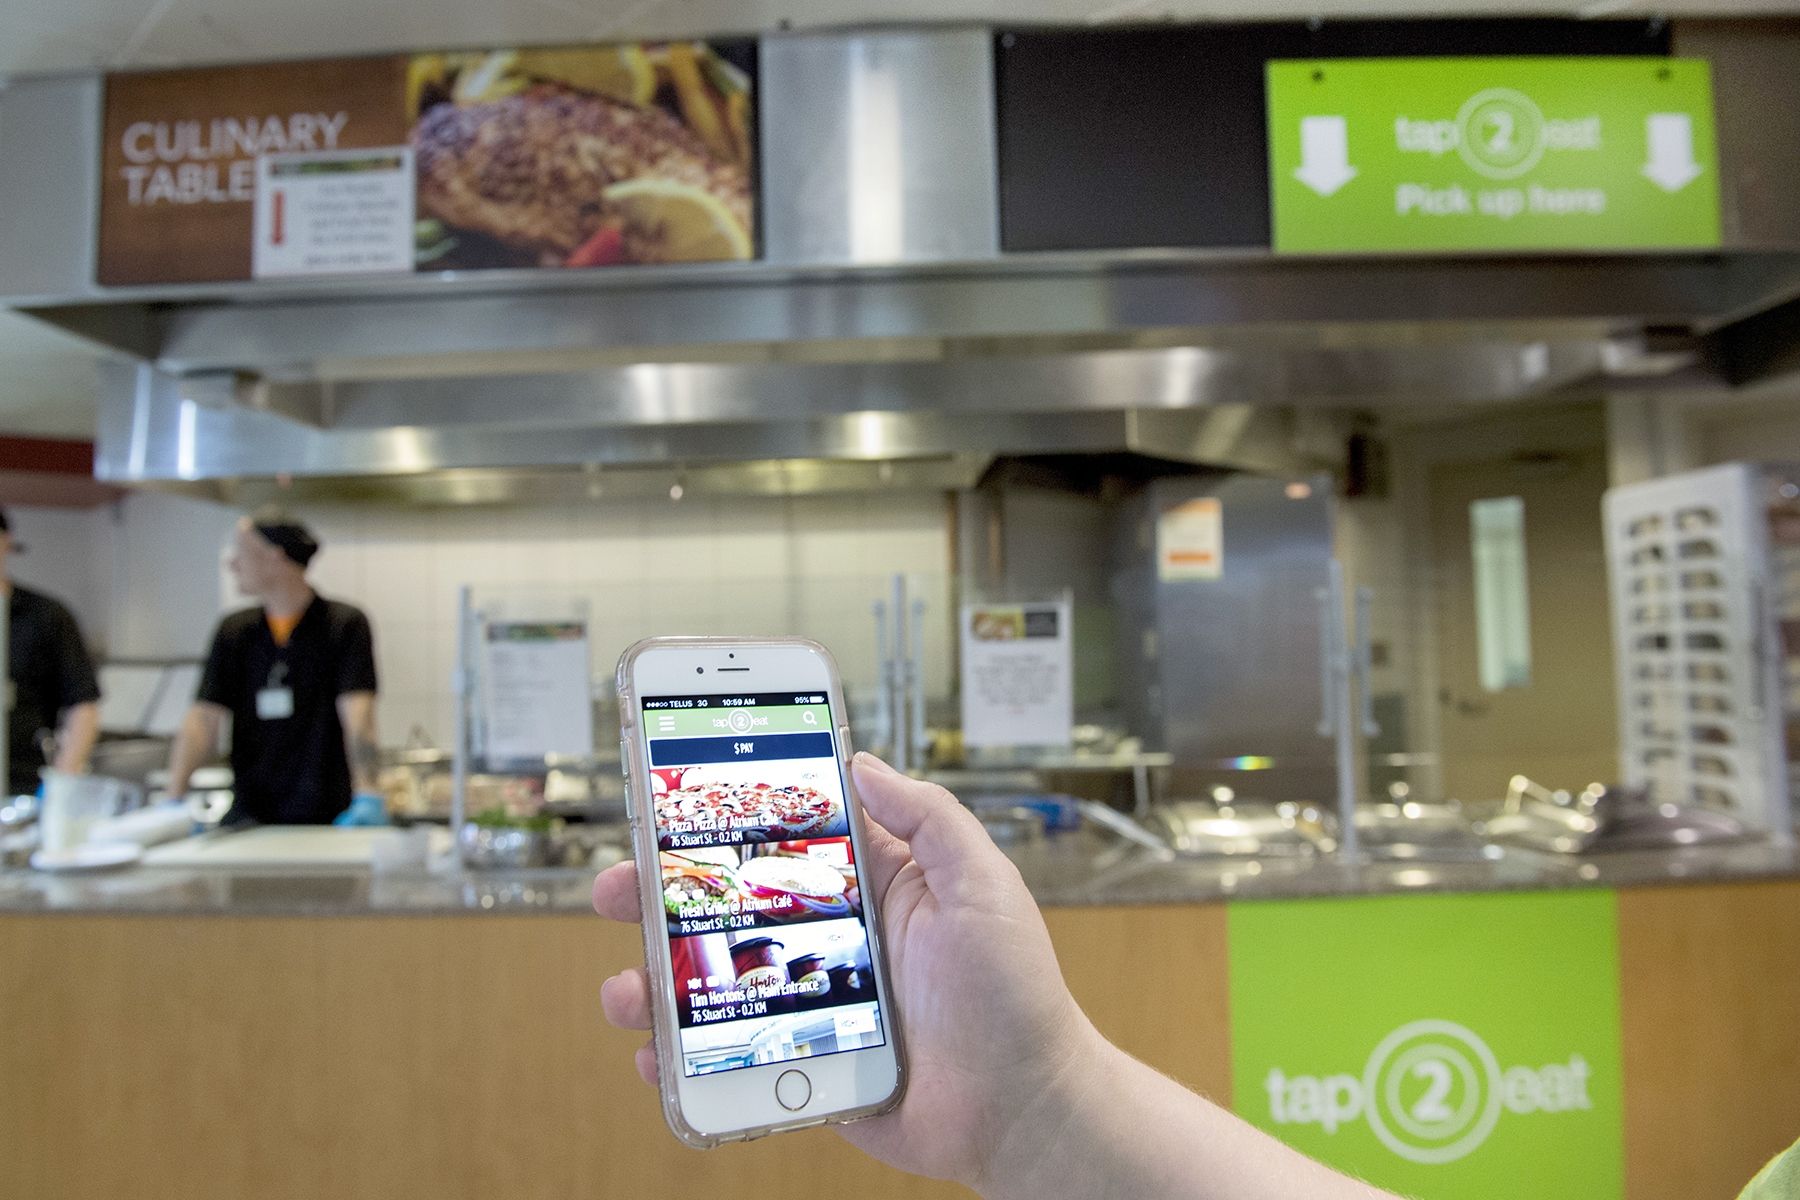  The new tap2eat app allows users to order and pay for food and beverages at KGH using their mobile device. 